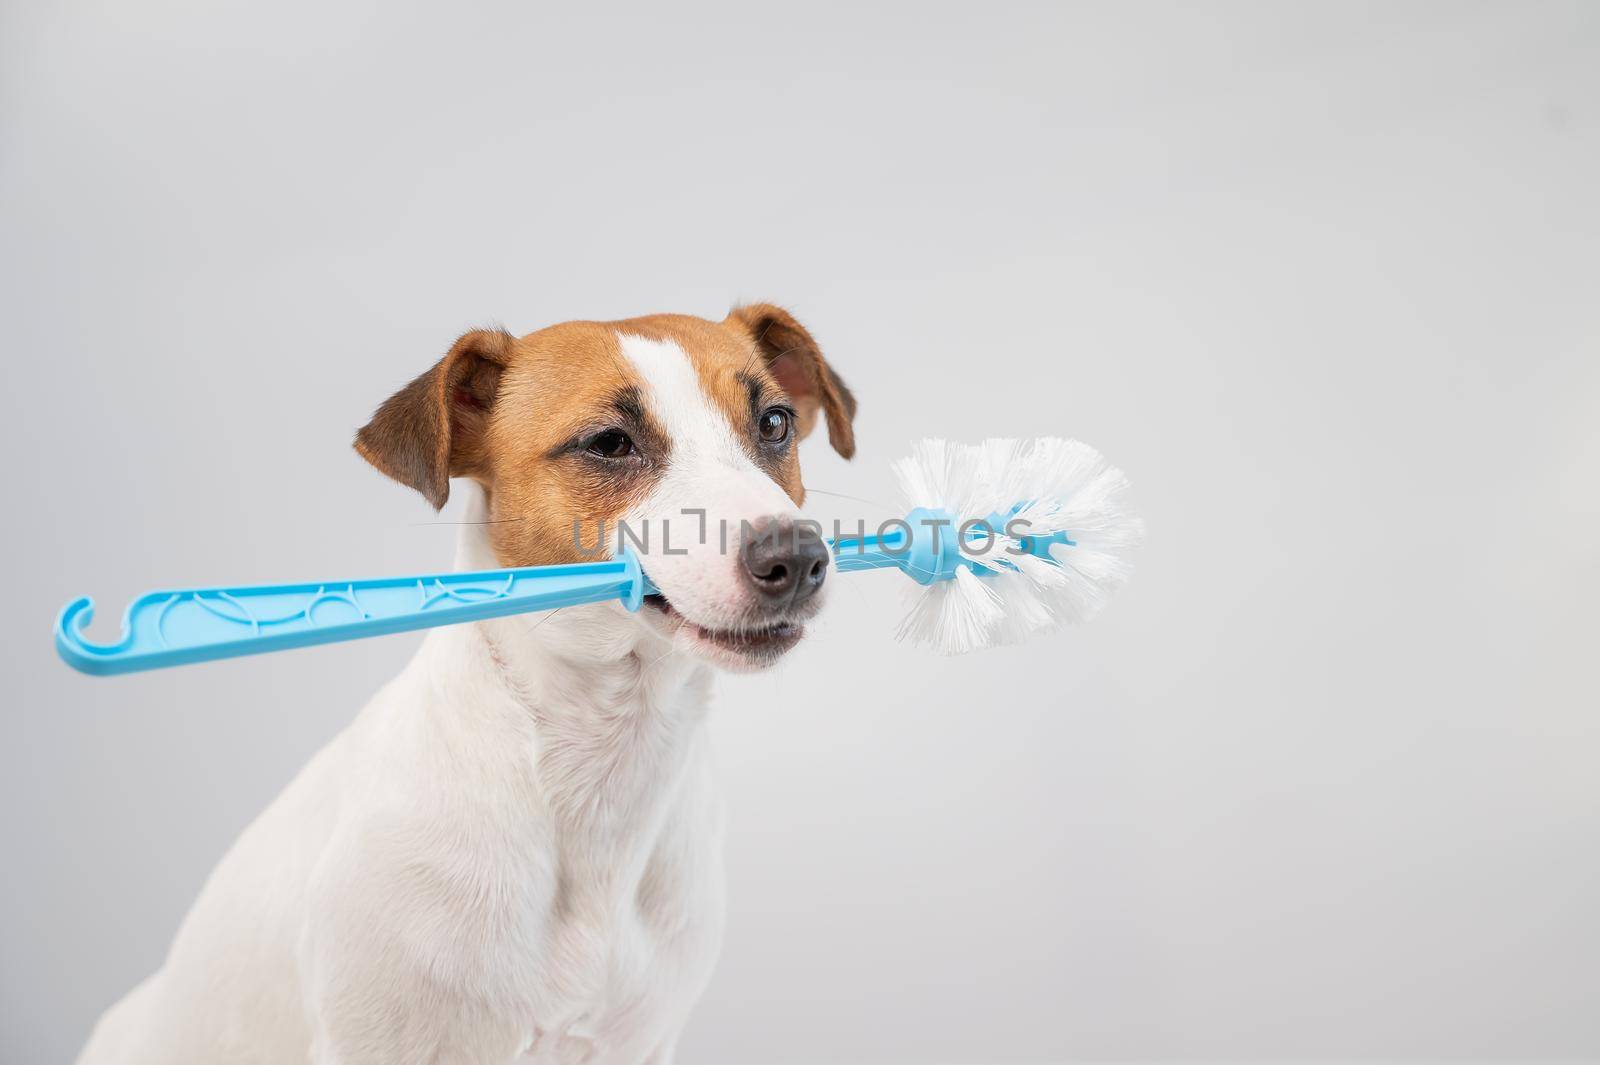 Jack russell terrier dog holds a blue toilet brush in his mouth. Plumbing cleaner.